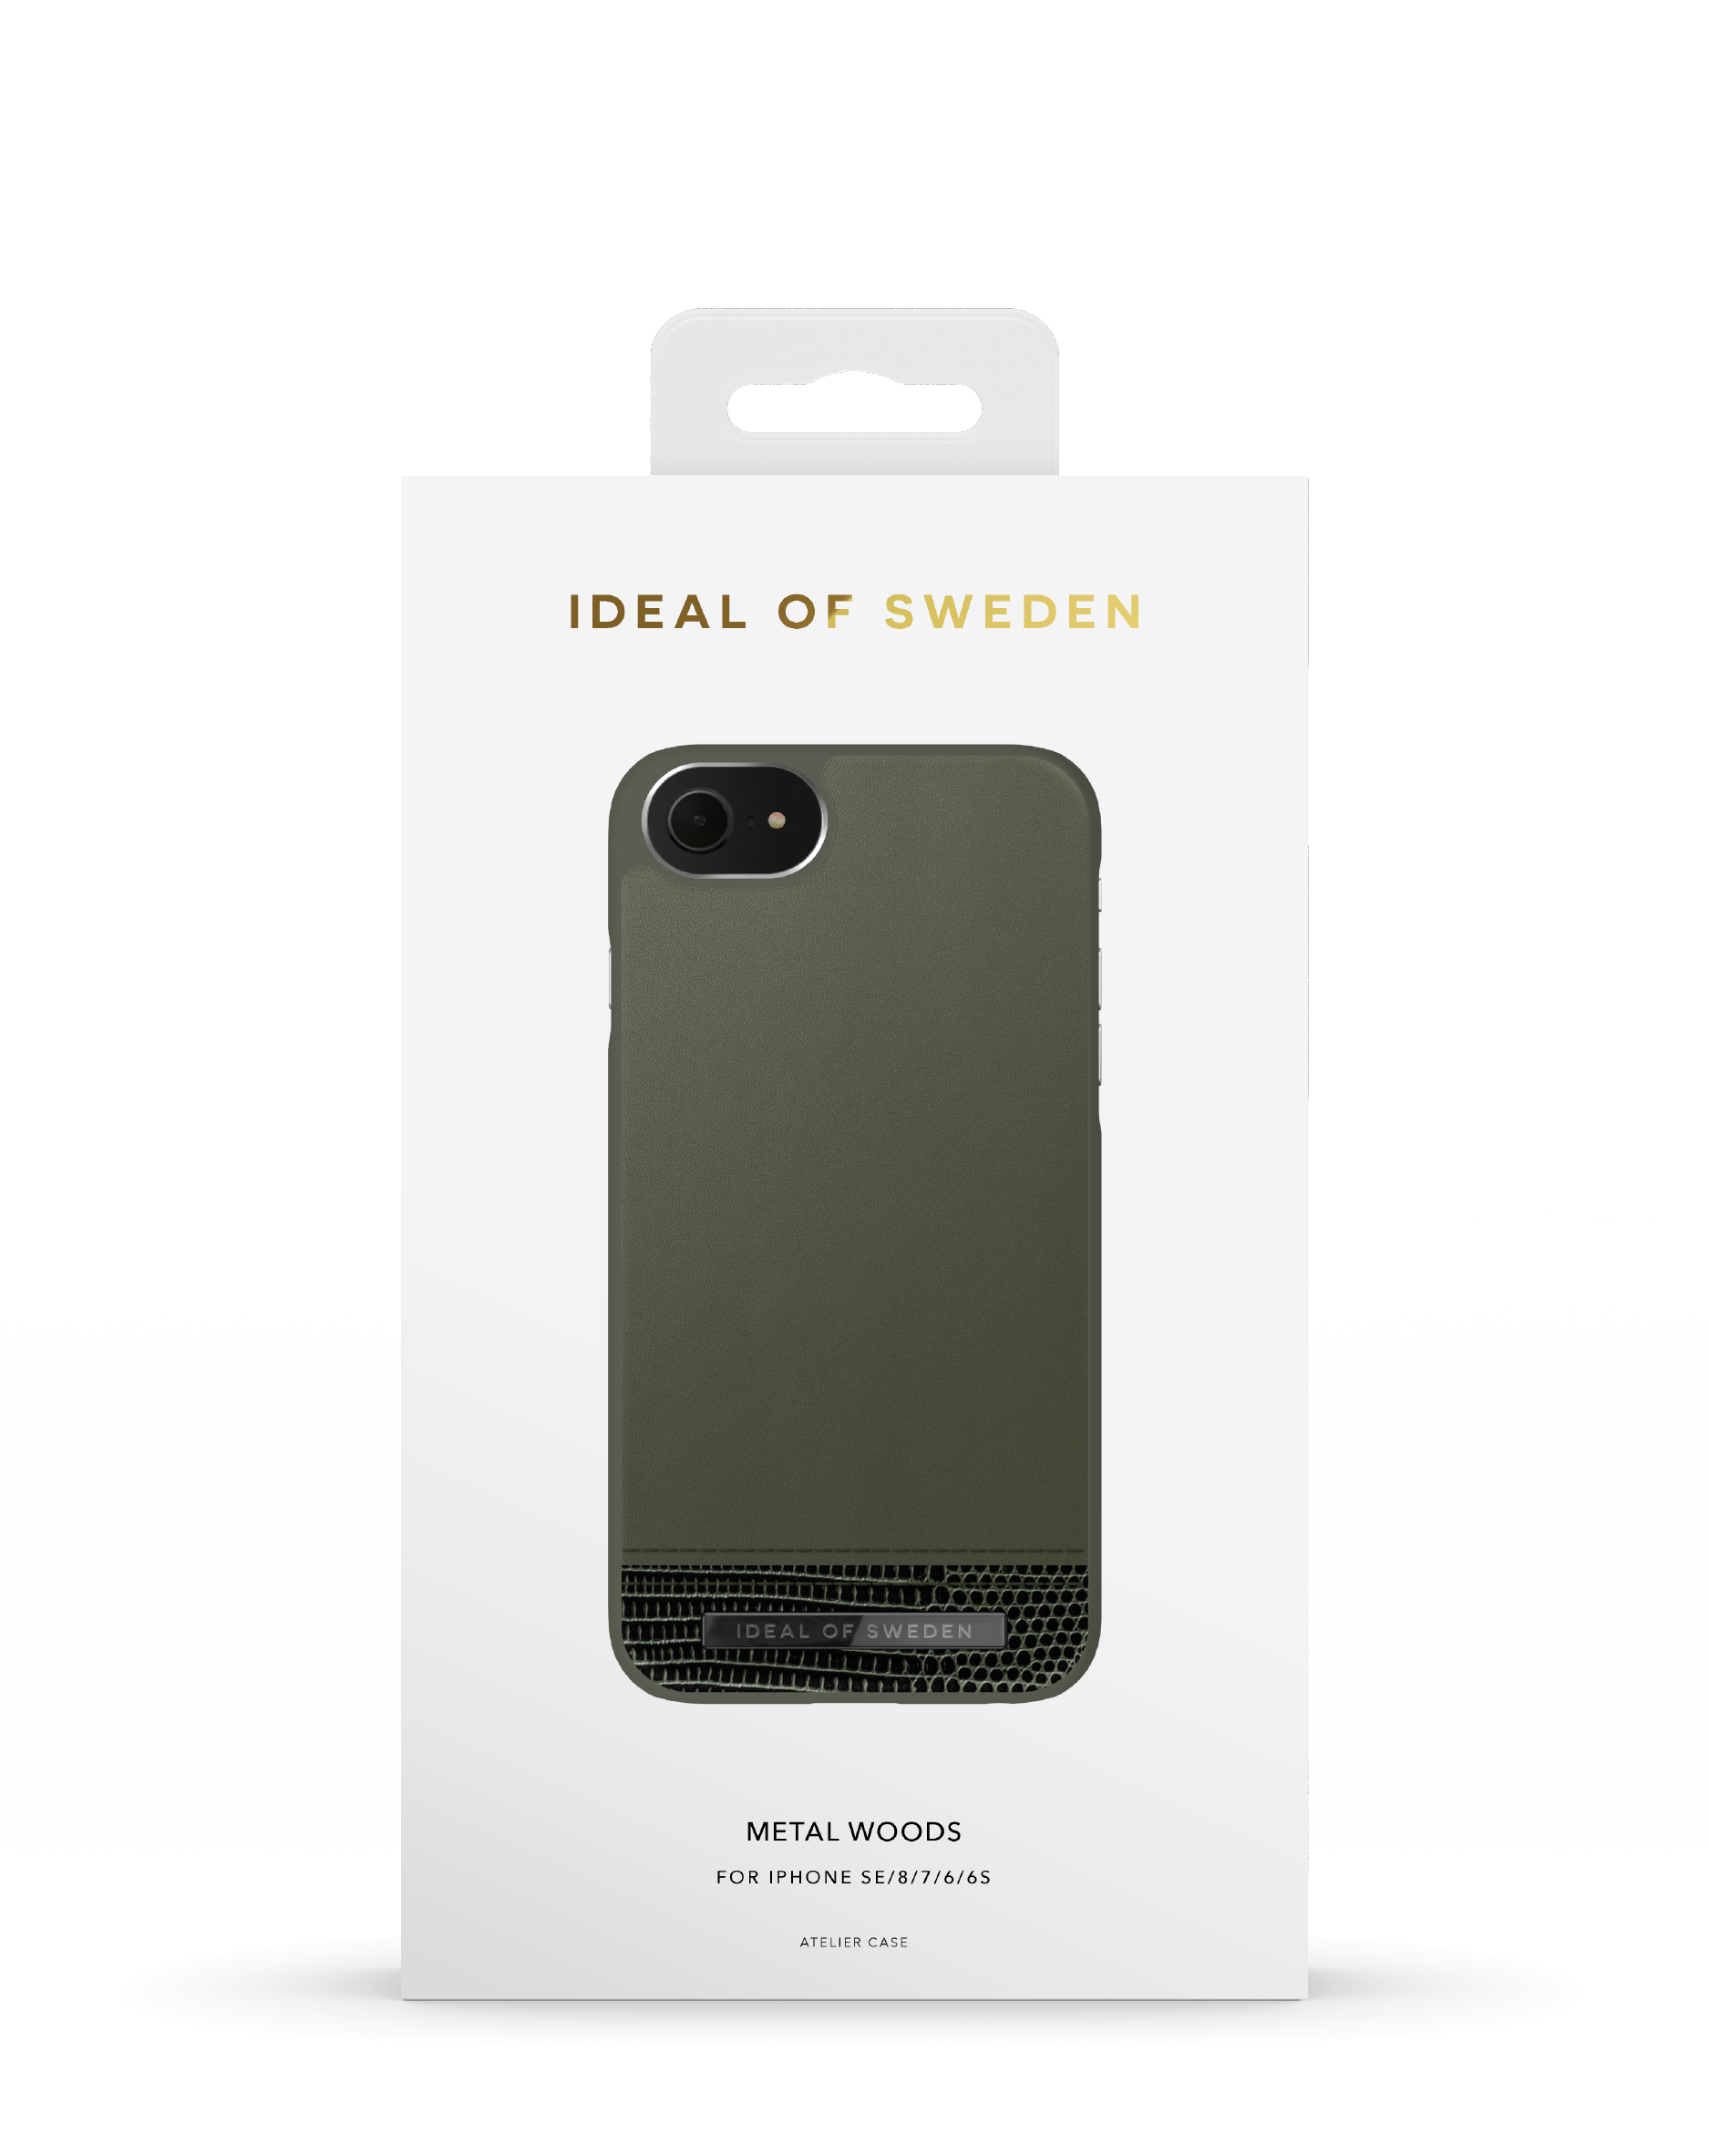 IDEAL OF SWEDEN IDACAW20-I7-235, (2020), Backcover, iPhone 6(S), 8, Apple SE Apple iPhone Apple Woods Apple, Metal iPhone iPhone 7, Apple